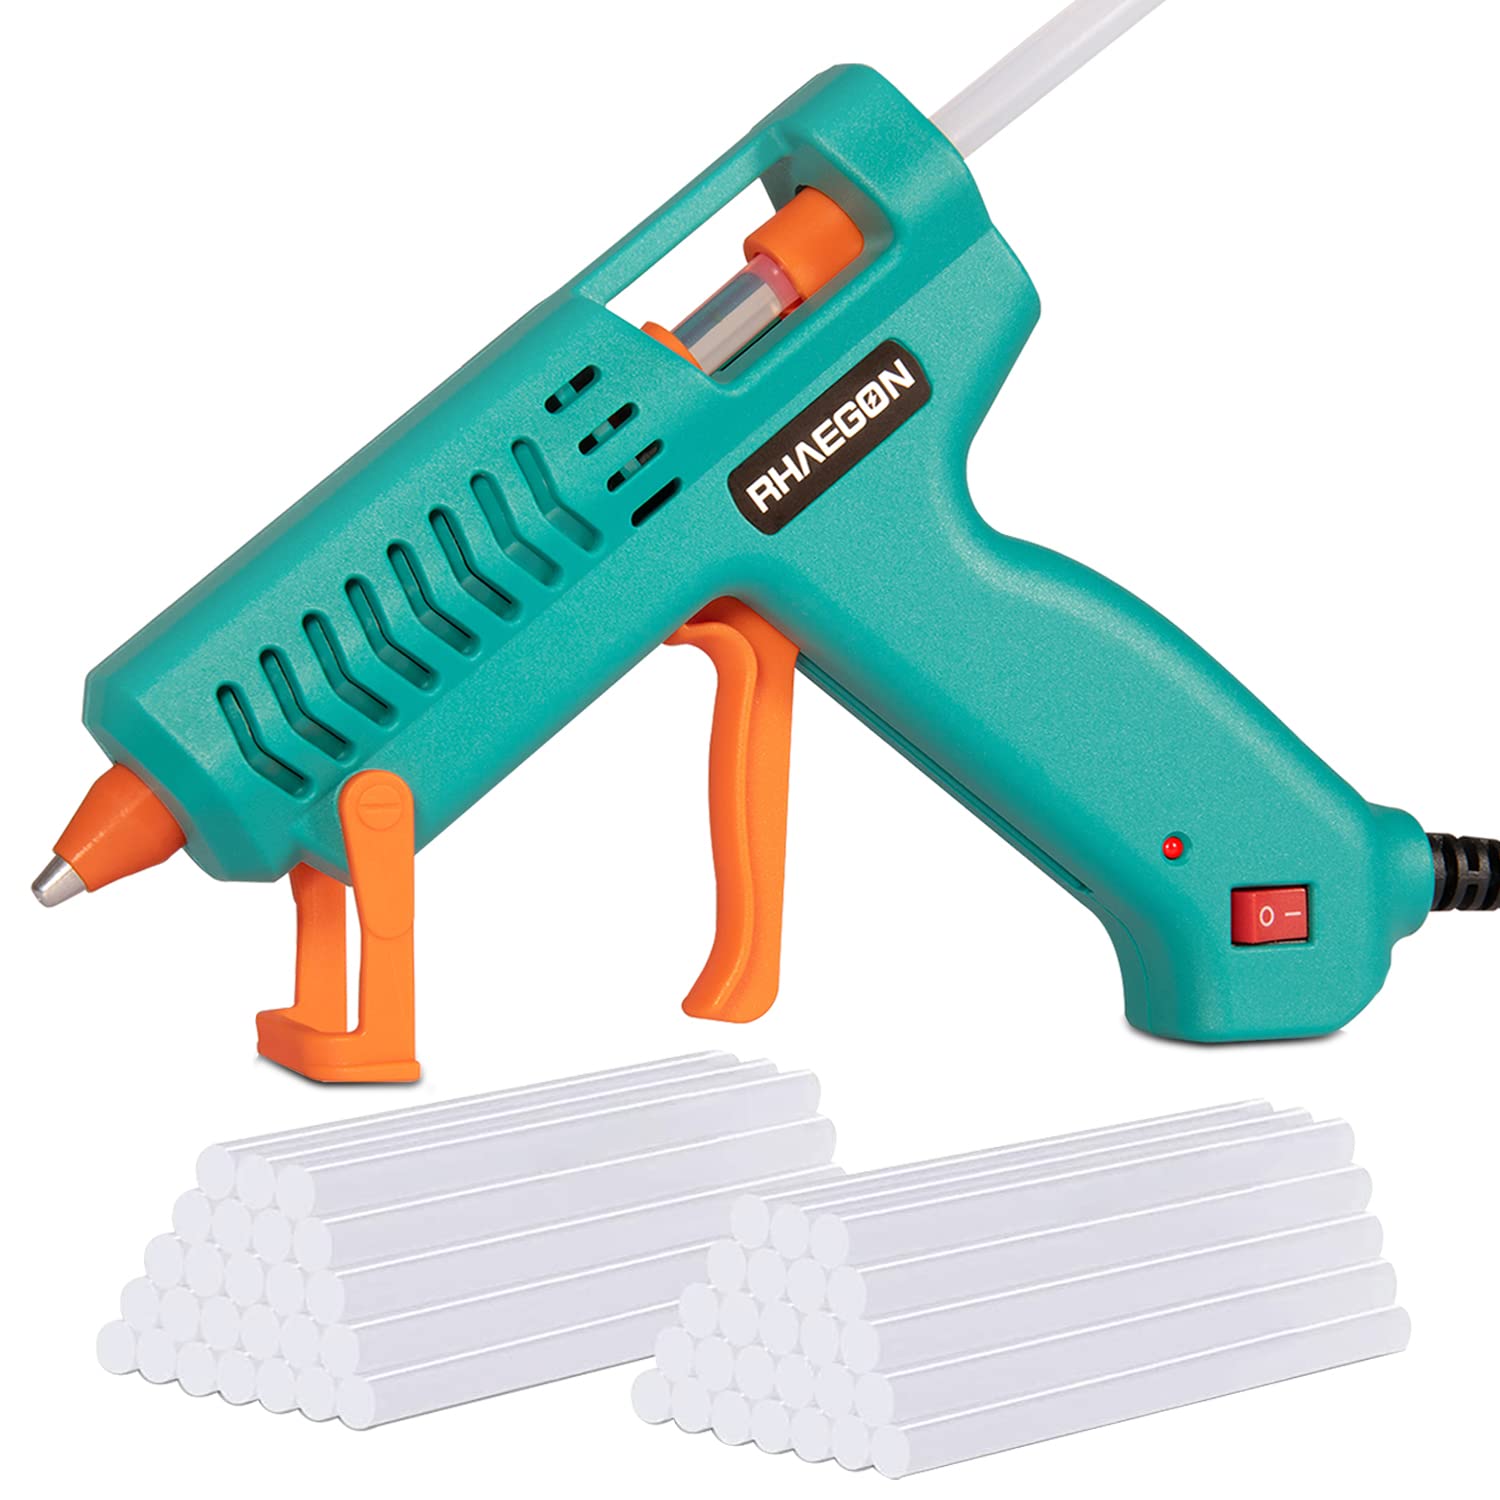 RHAEGON 60W Hot Glue Gun for Crafting and Repairs Drip-free and  Leakage-proof Patent Designs Small Glue Gun Kit with 50pcs Glue  Sticks(7mmx130mm)